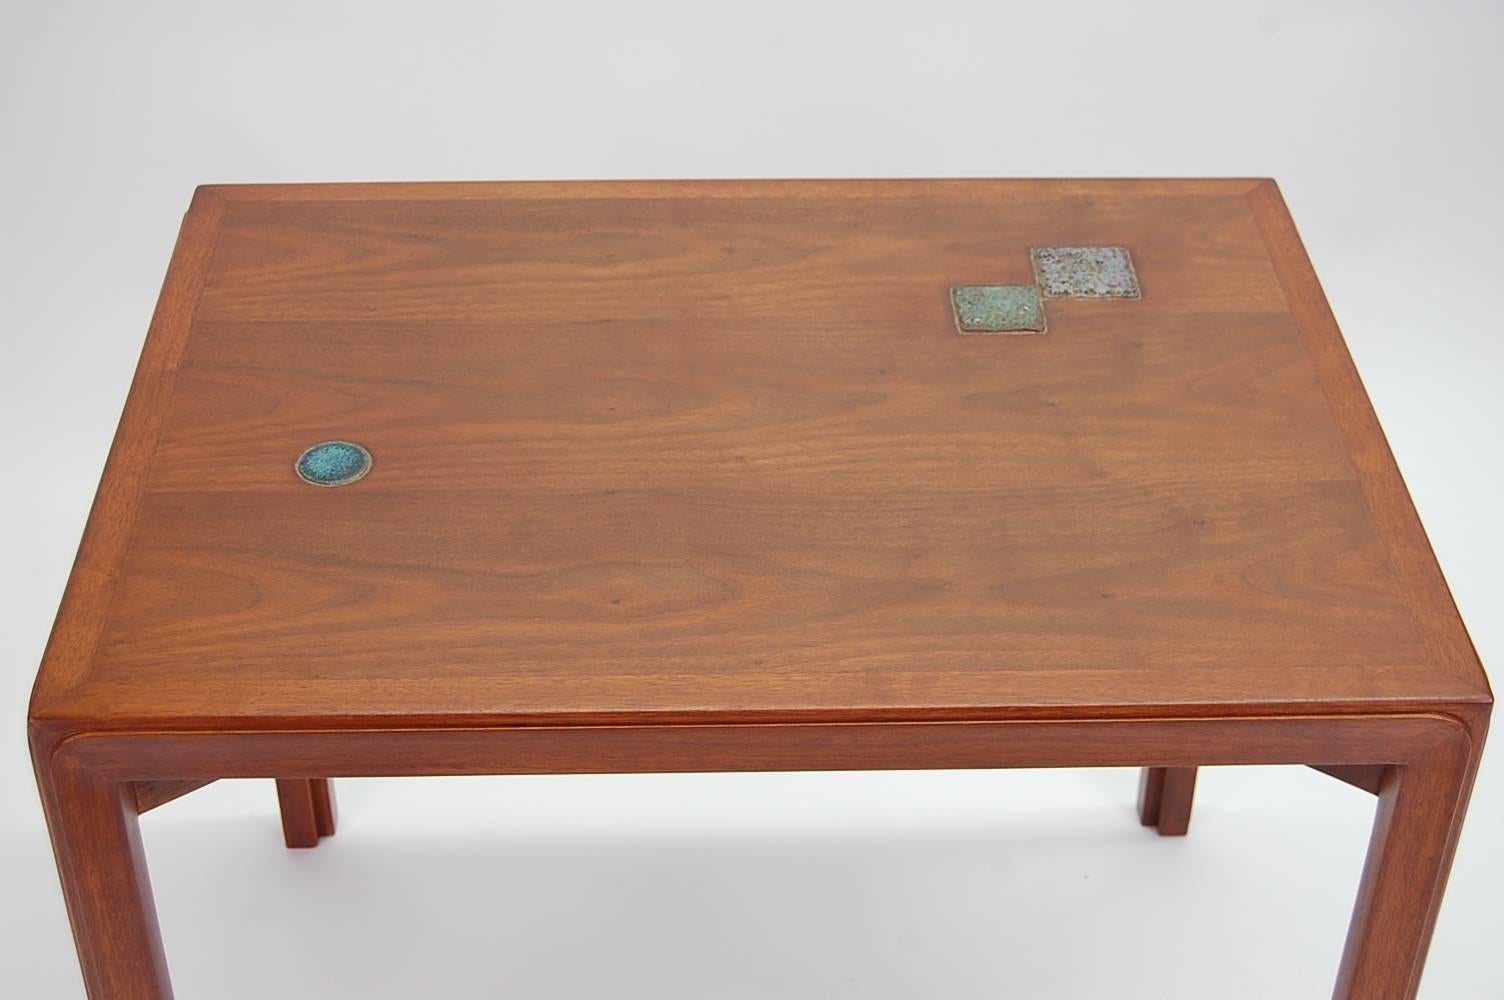 Occasional table in walnut with Natzler tiles, designed by Edward Wormley for Dunbar. From Dunbar's 